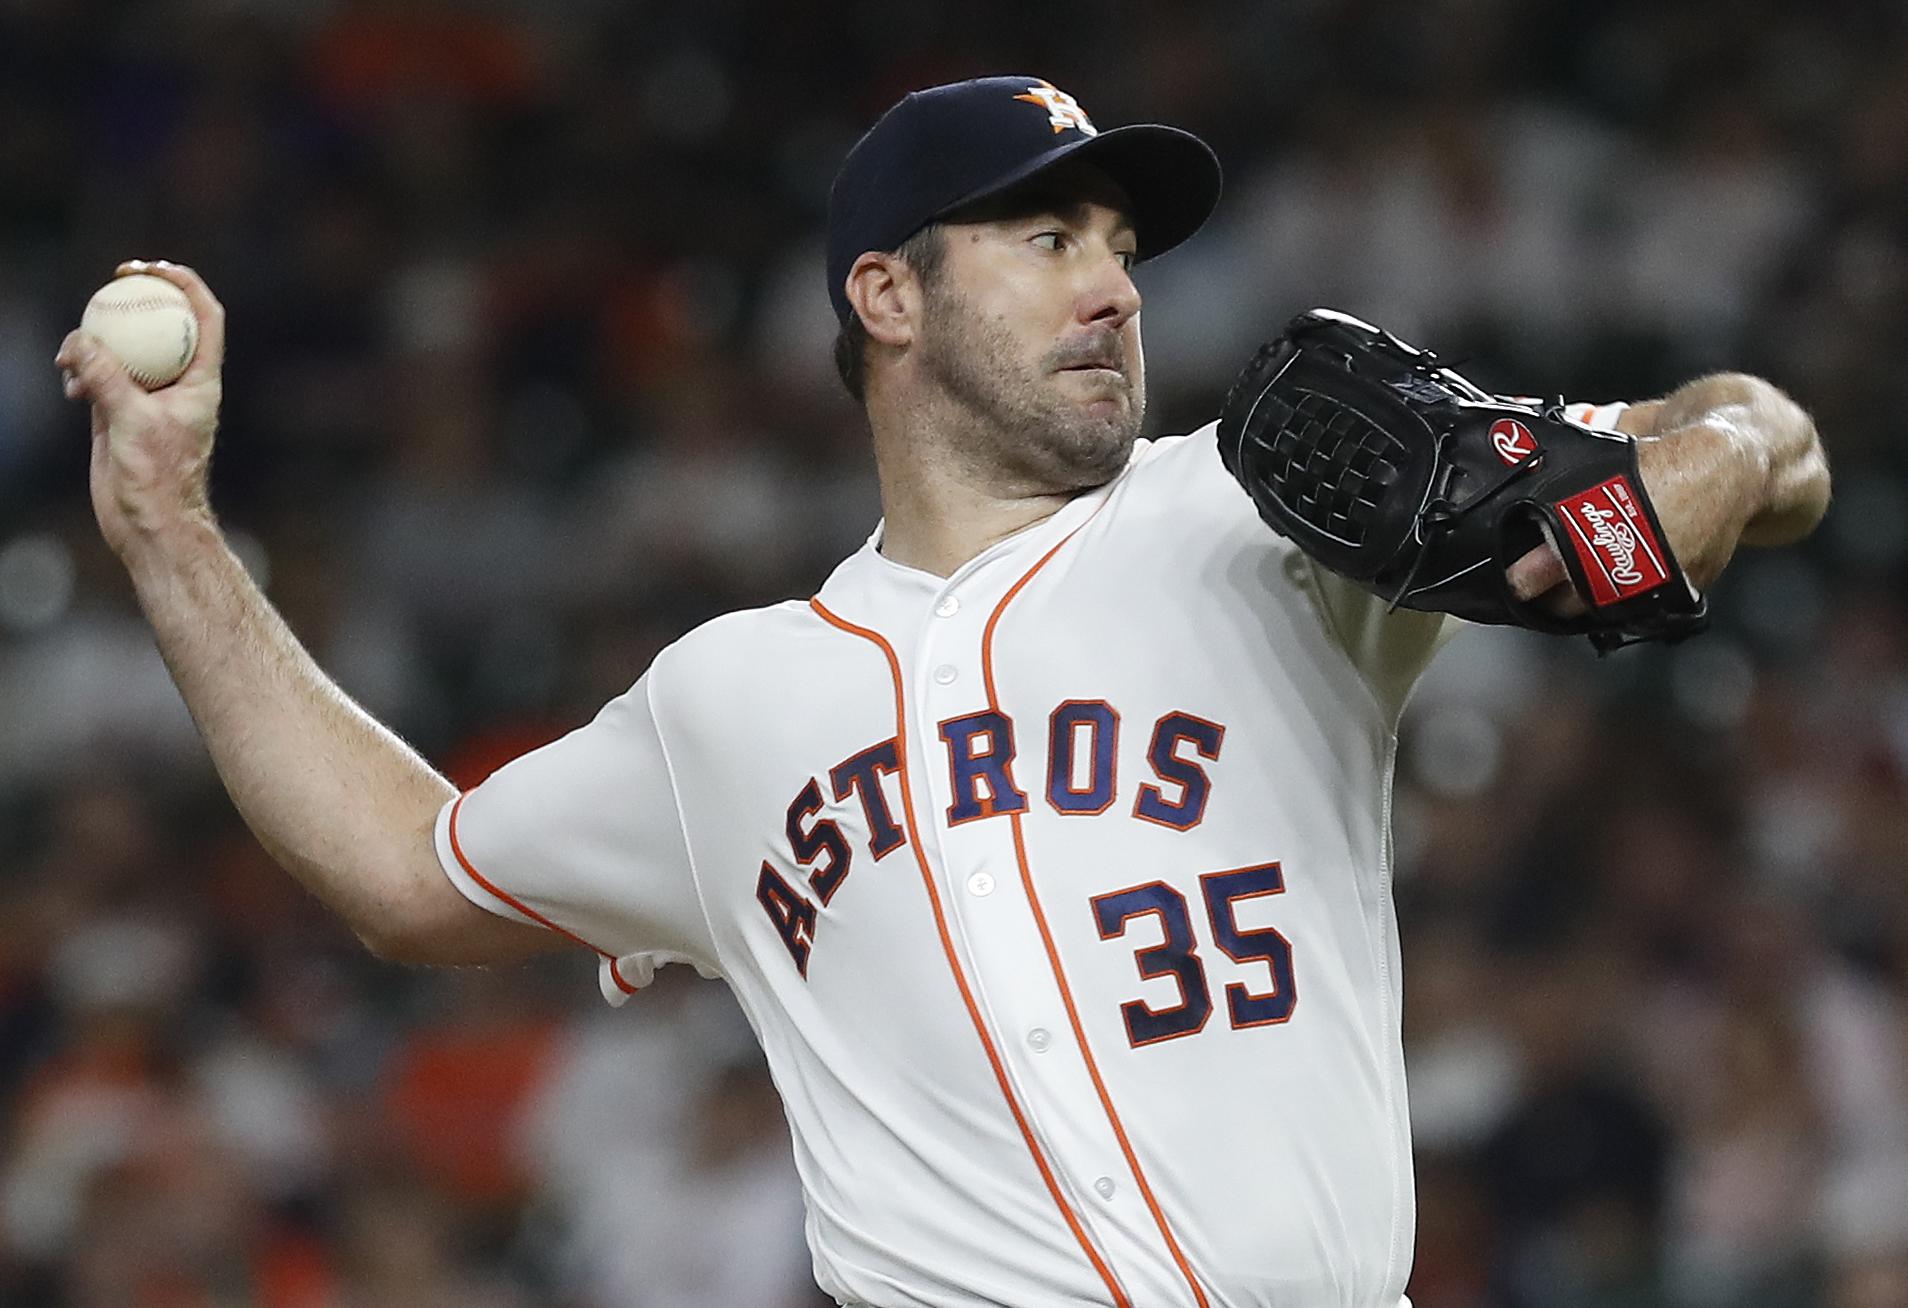 He's always had the stuff': Ryan Pressly's path to becoming a relief ace  for the Astros - The Athletic